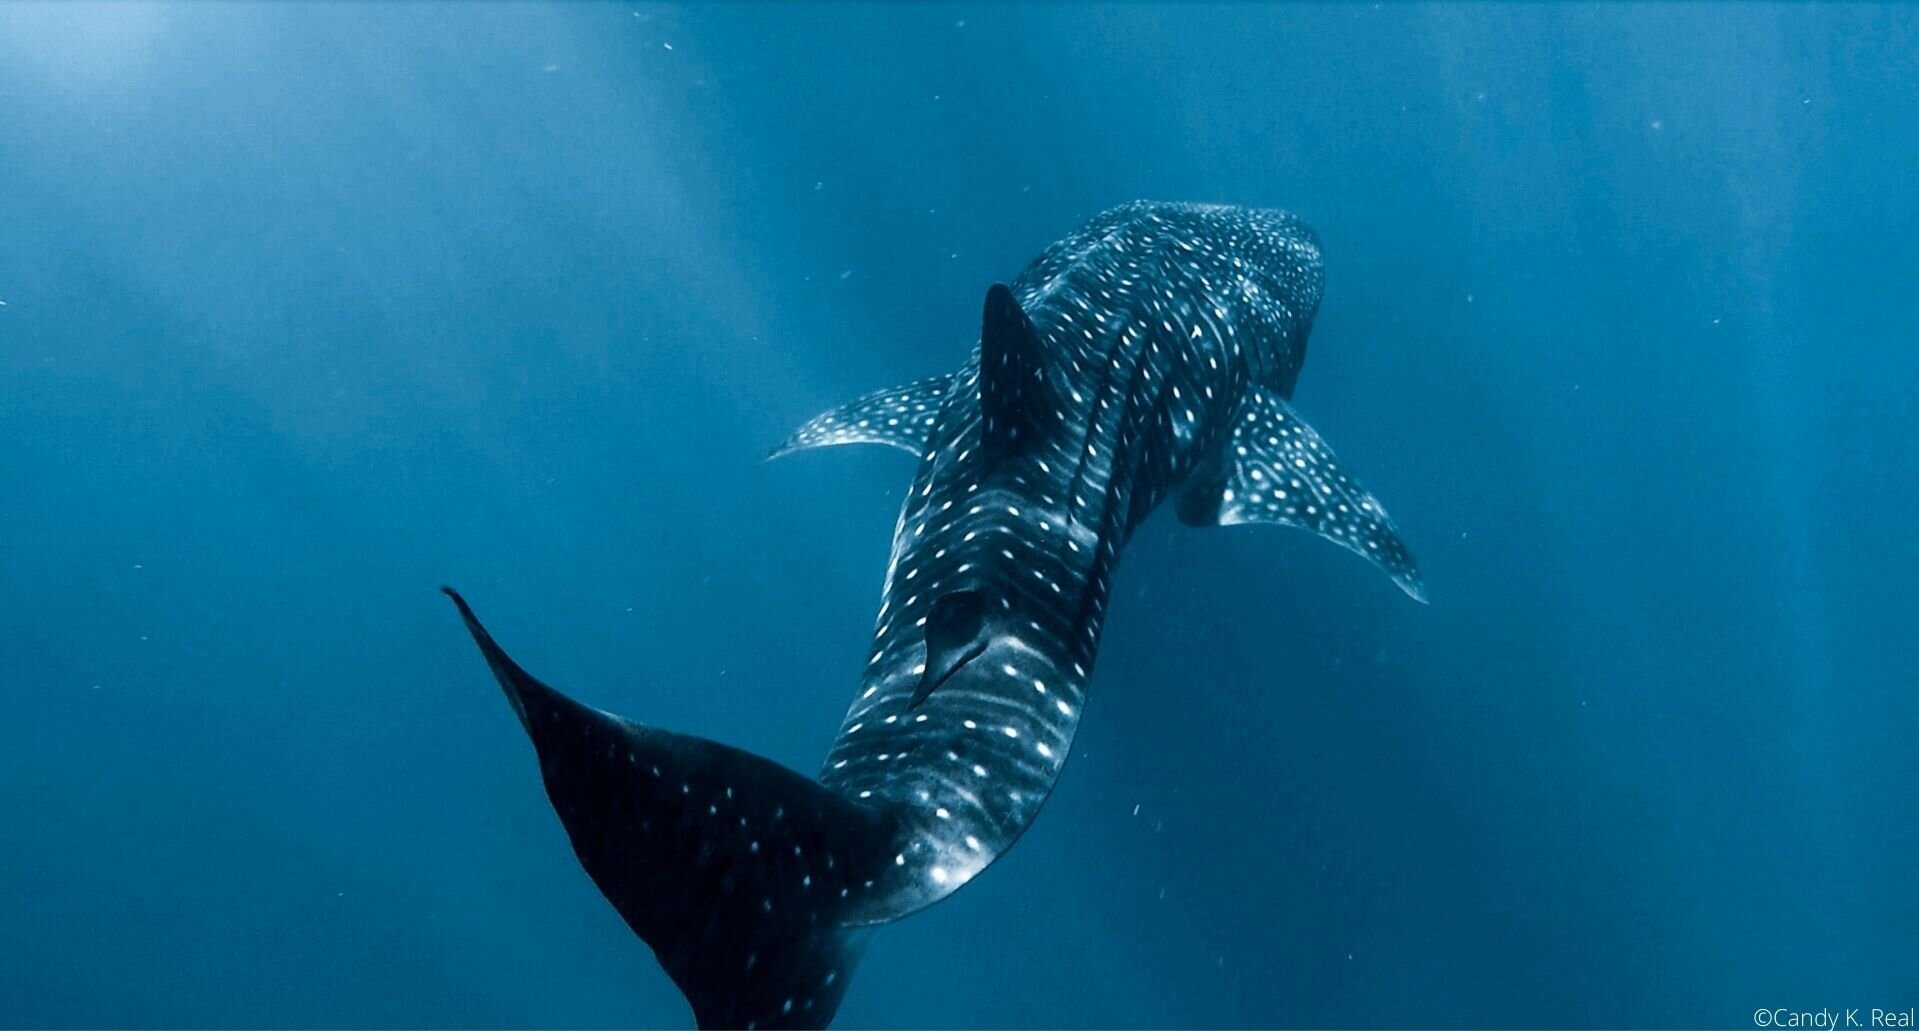 Misguided ecotourism may lead to changes in whale shark behavior